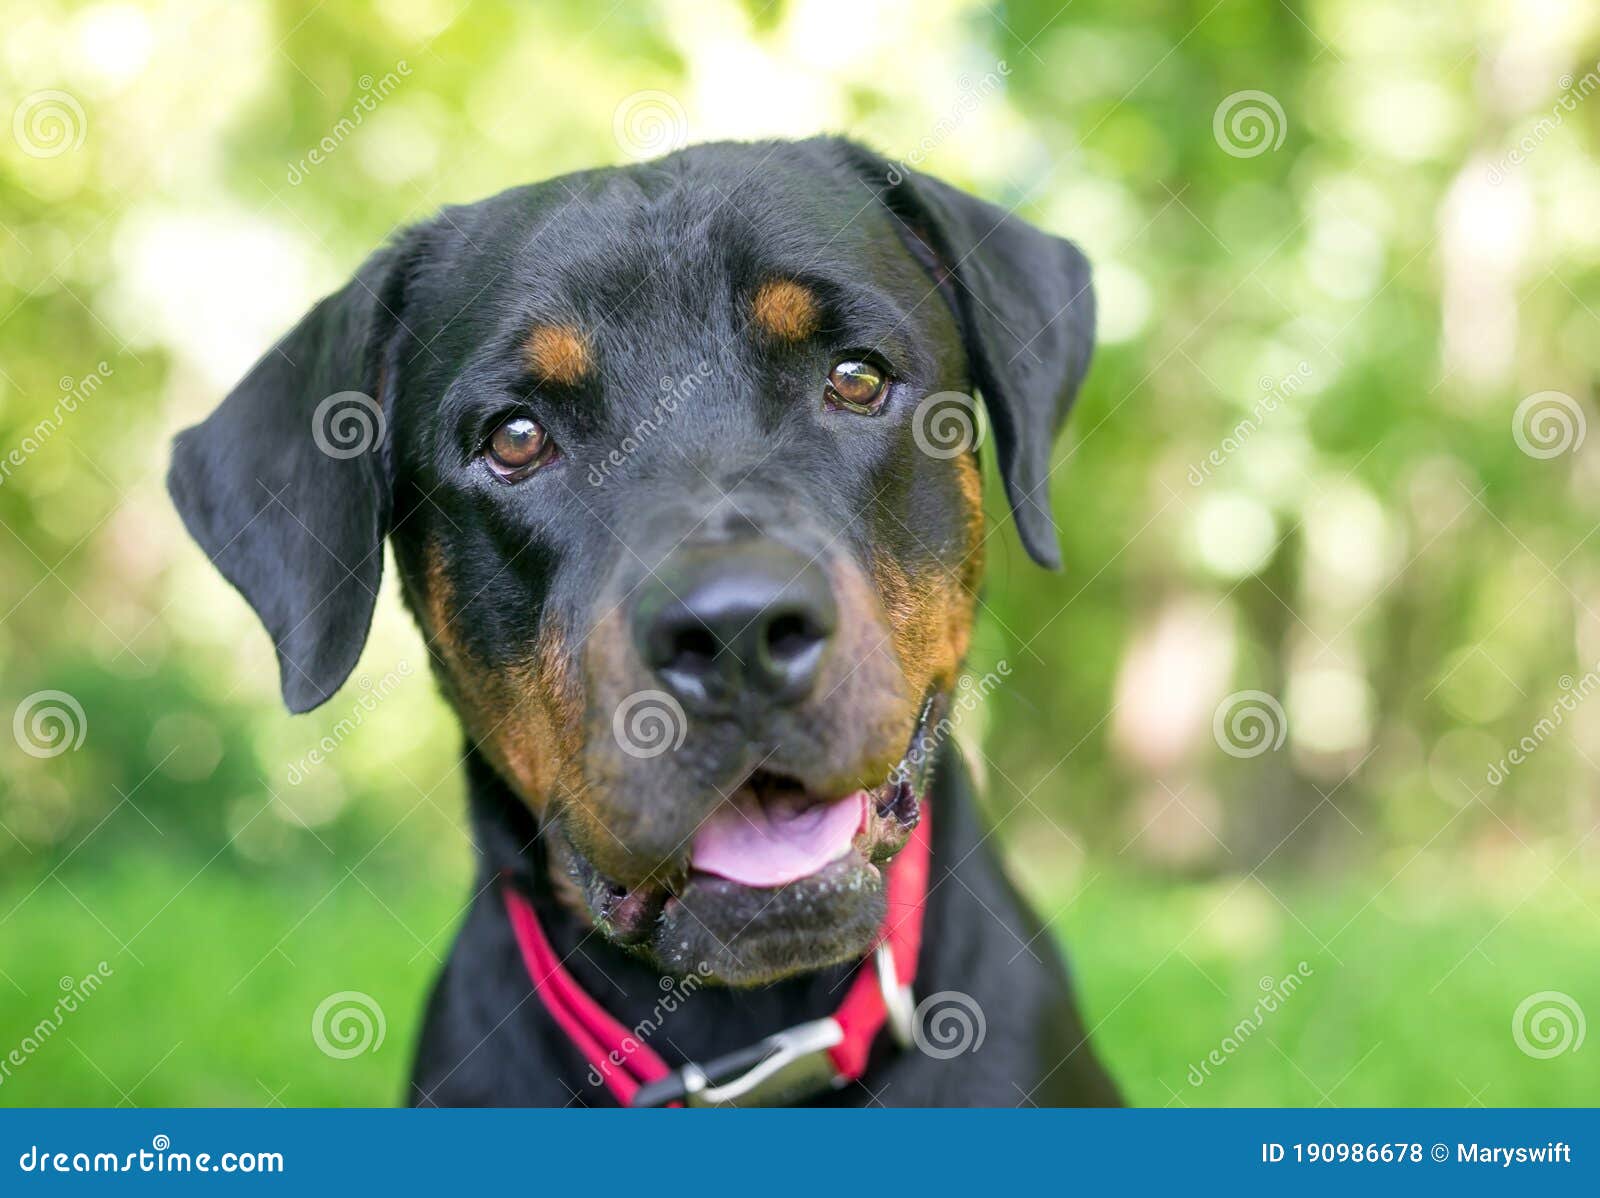 A Rottweiler Dog Wearing a Red Collar Stock Photo - Image of 